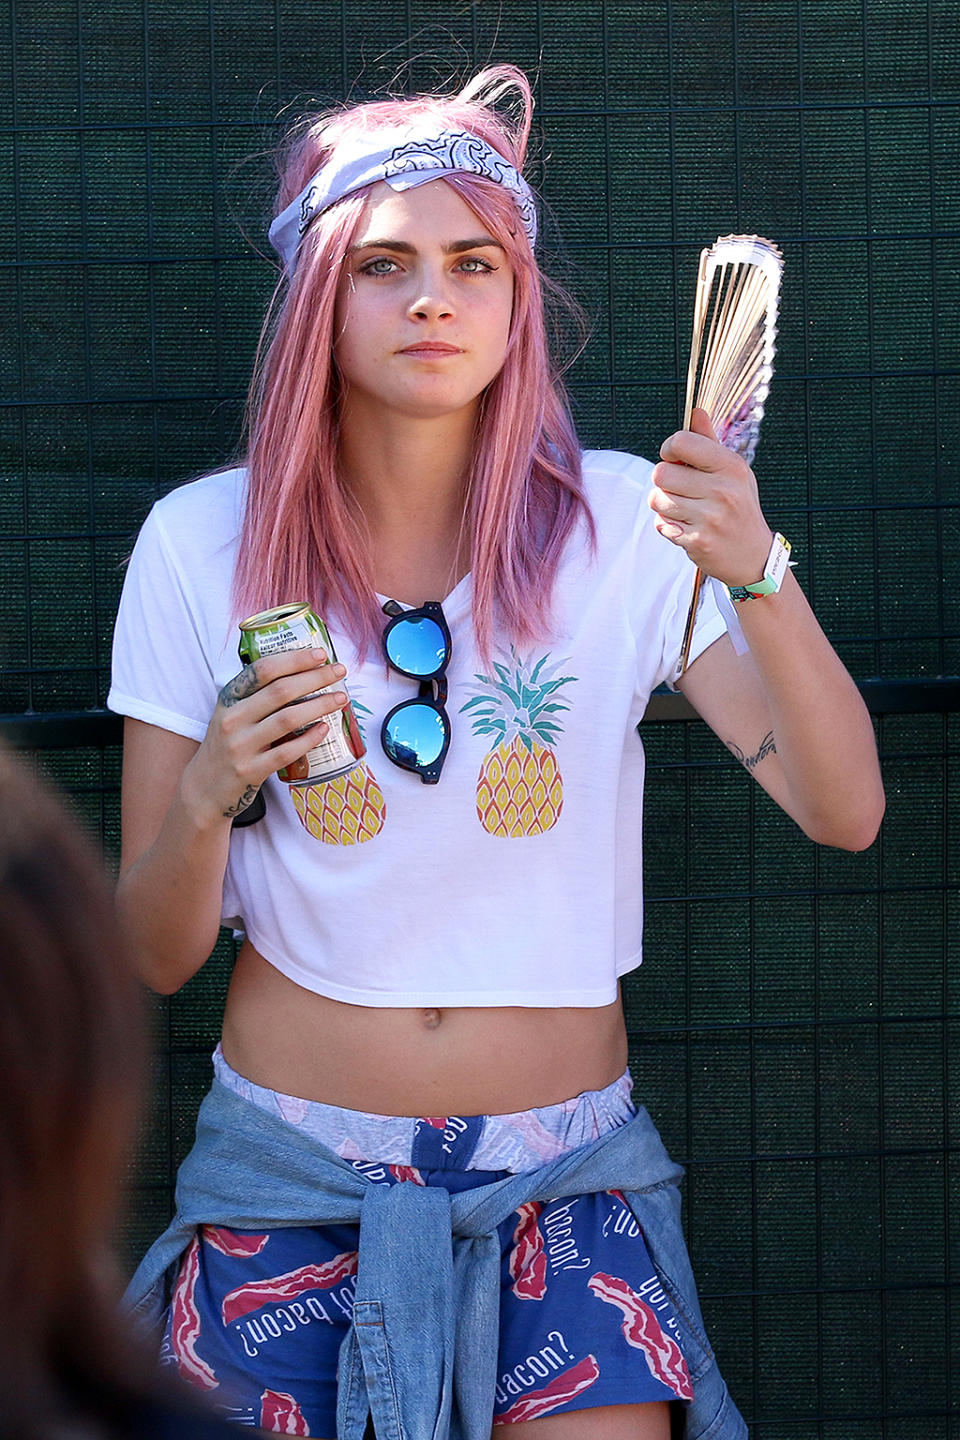 Cara Delevingne with pink hair